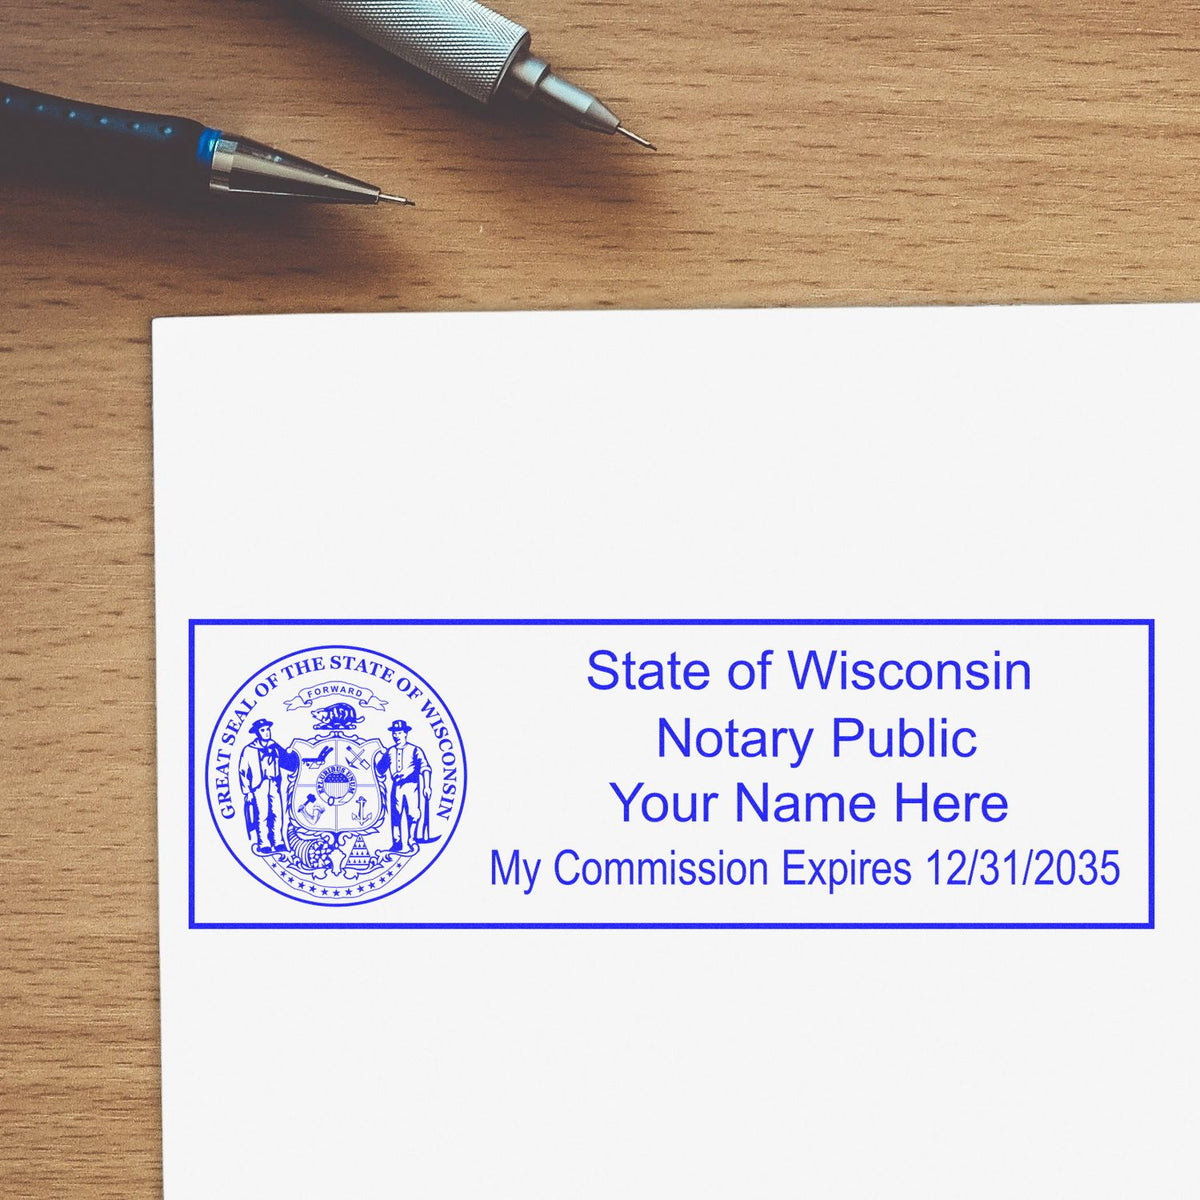 This paper is stamped with a sample imprint of the Slim Pre-Inked State Seal Notary Stamp for Wisconsin, signifying its quality and reliability.